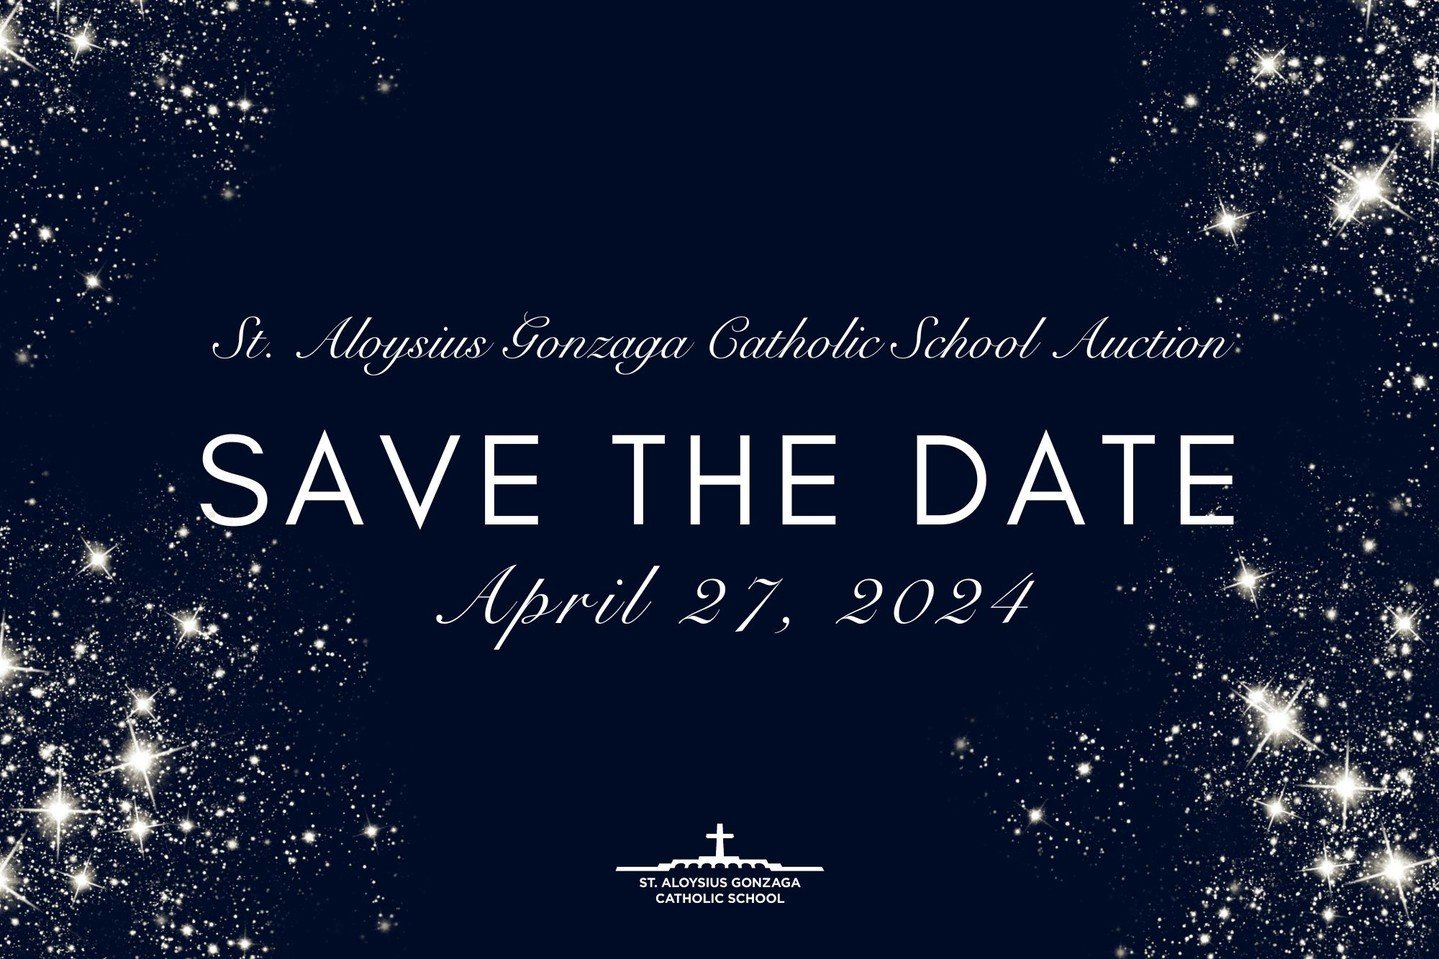 AUCTION TICKET SALES END TODAY!!!⁠
Very few tickets are still available for our annual auction on Saturday, April 27!!! ⁠
⁠
***GET YOUR AUCTION TICKETS TODAY!!!***⁠
$75 PER PERSON⁠
Includes dinner and 2 drink tickets! ⁠
Ticket sales CLOSE TODAY, so g